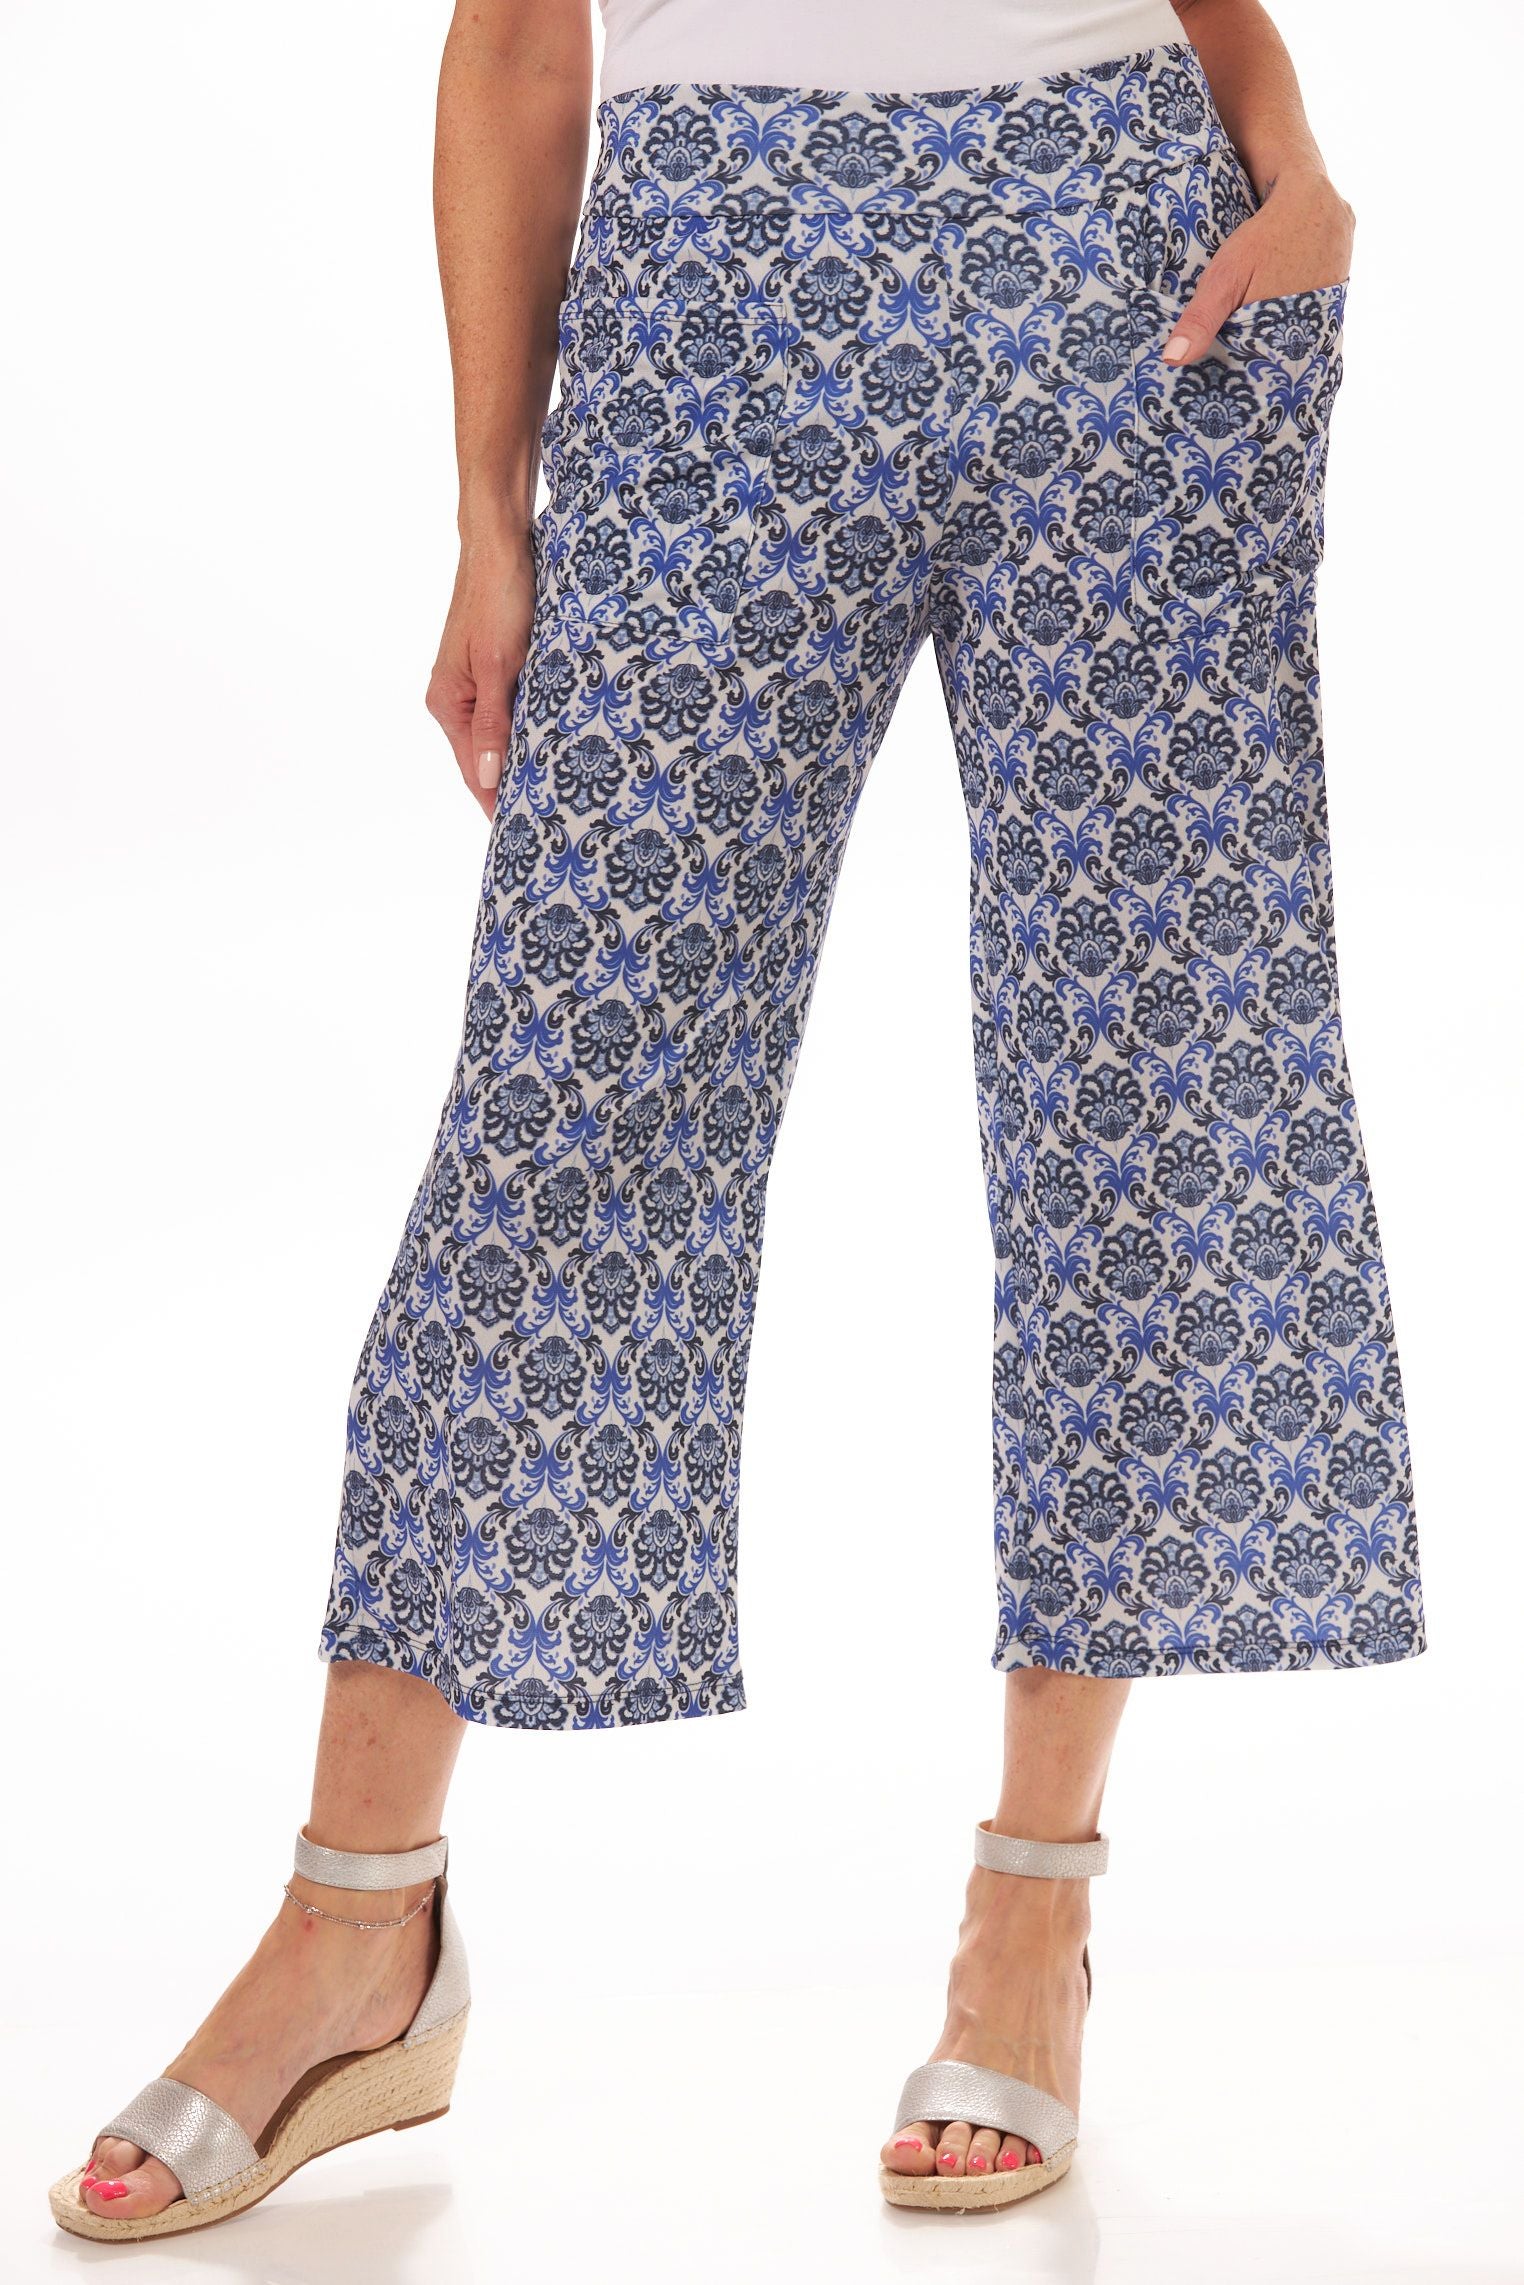 UP 67928 comfortable pull-on black gaucho pants